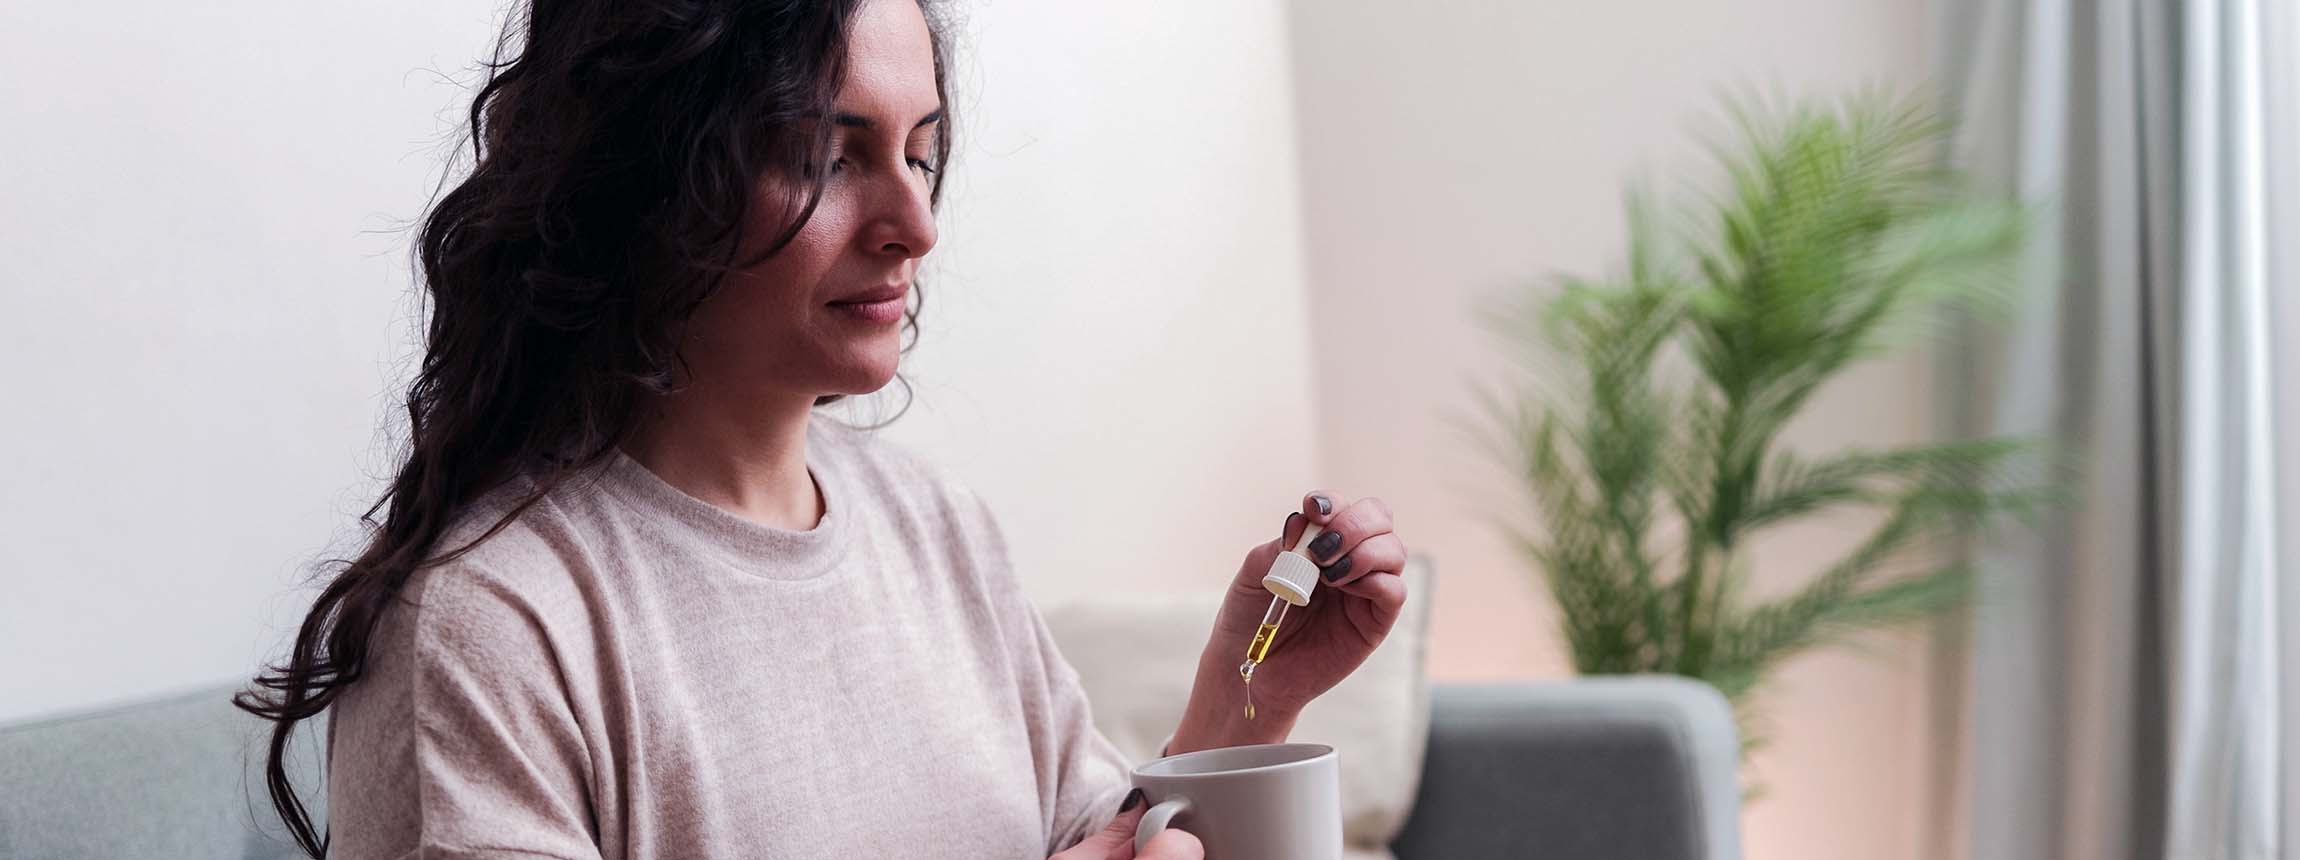 Woman taking cbd oil for anxiety treatment - vitamins and supplements